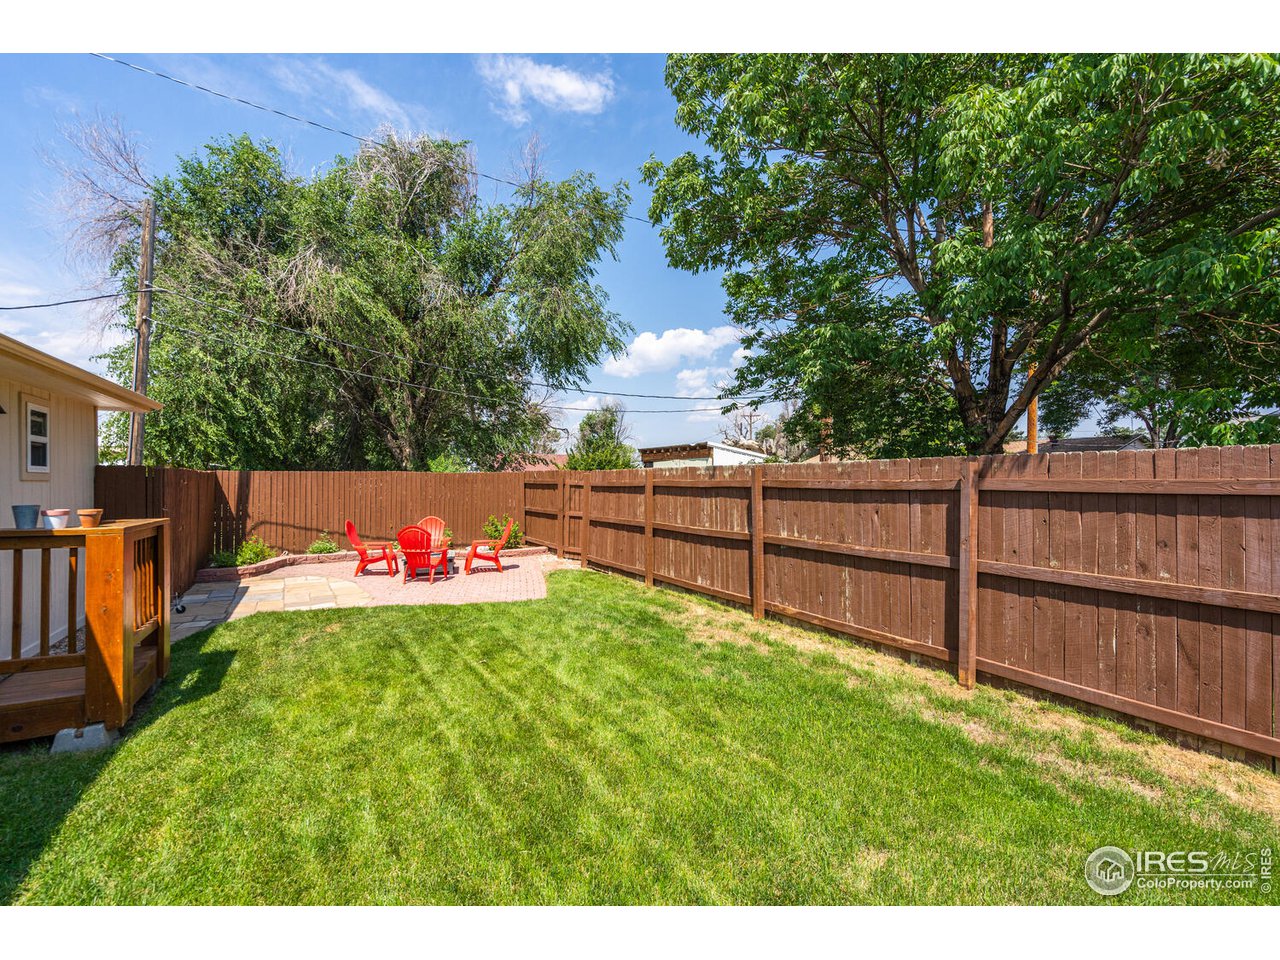 Guest house offers a private fully fenced backyard!